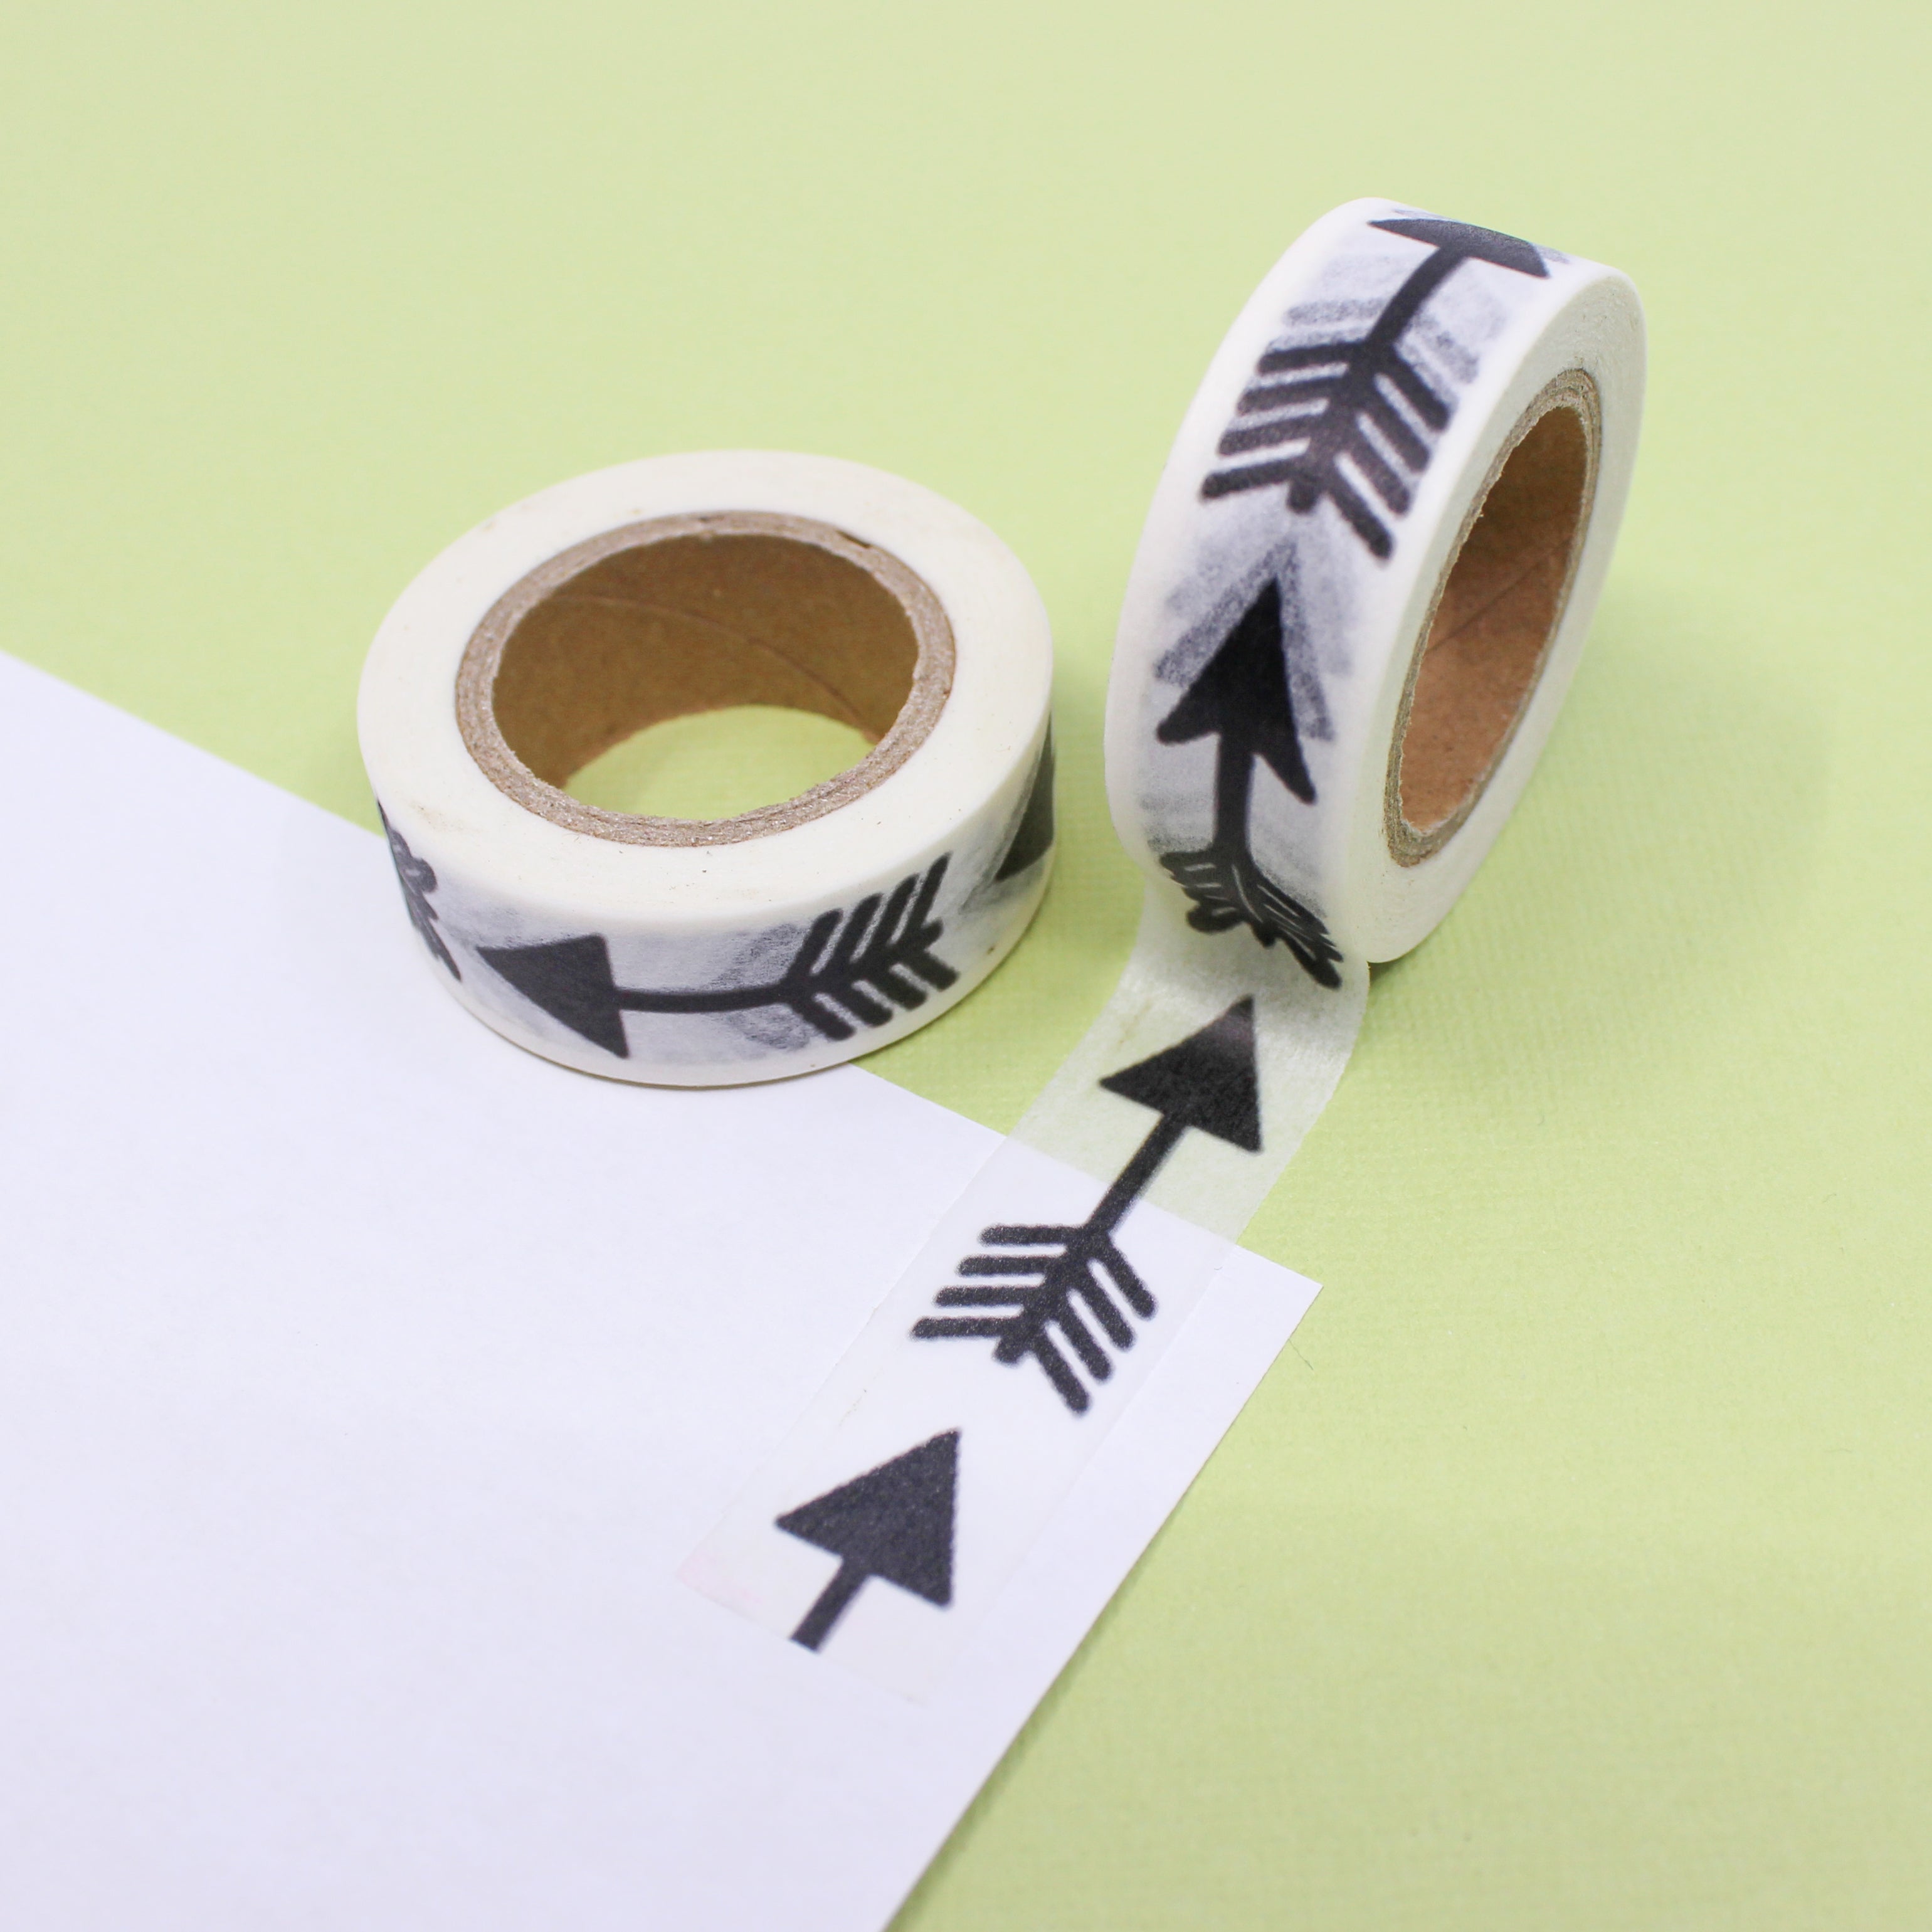 Black Squiggly Swirl Line Pattern Washi Tape, Swirl Washi Tape, Black and  White Pattern Washi, Border Washi Tape BBB Supplies R-ZH1382 